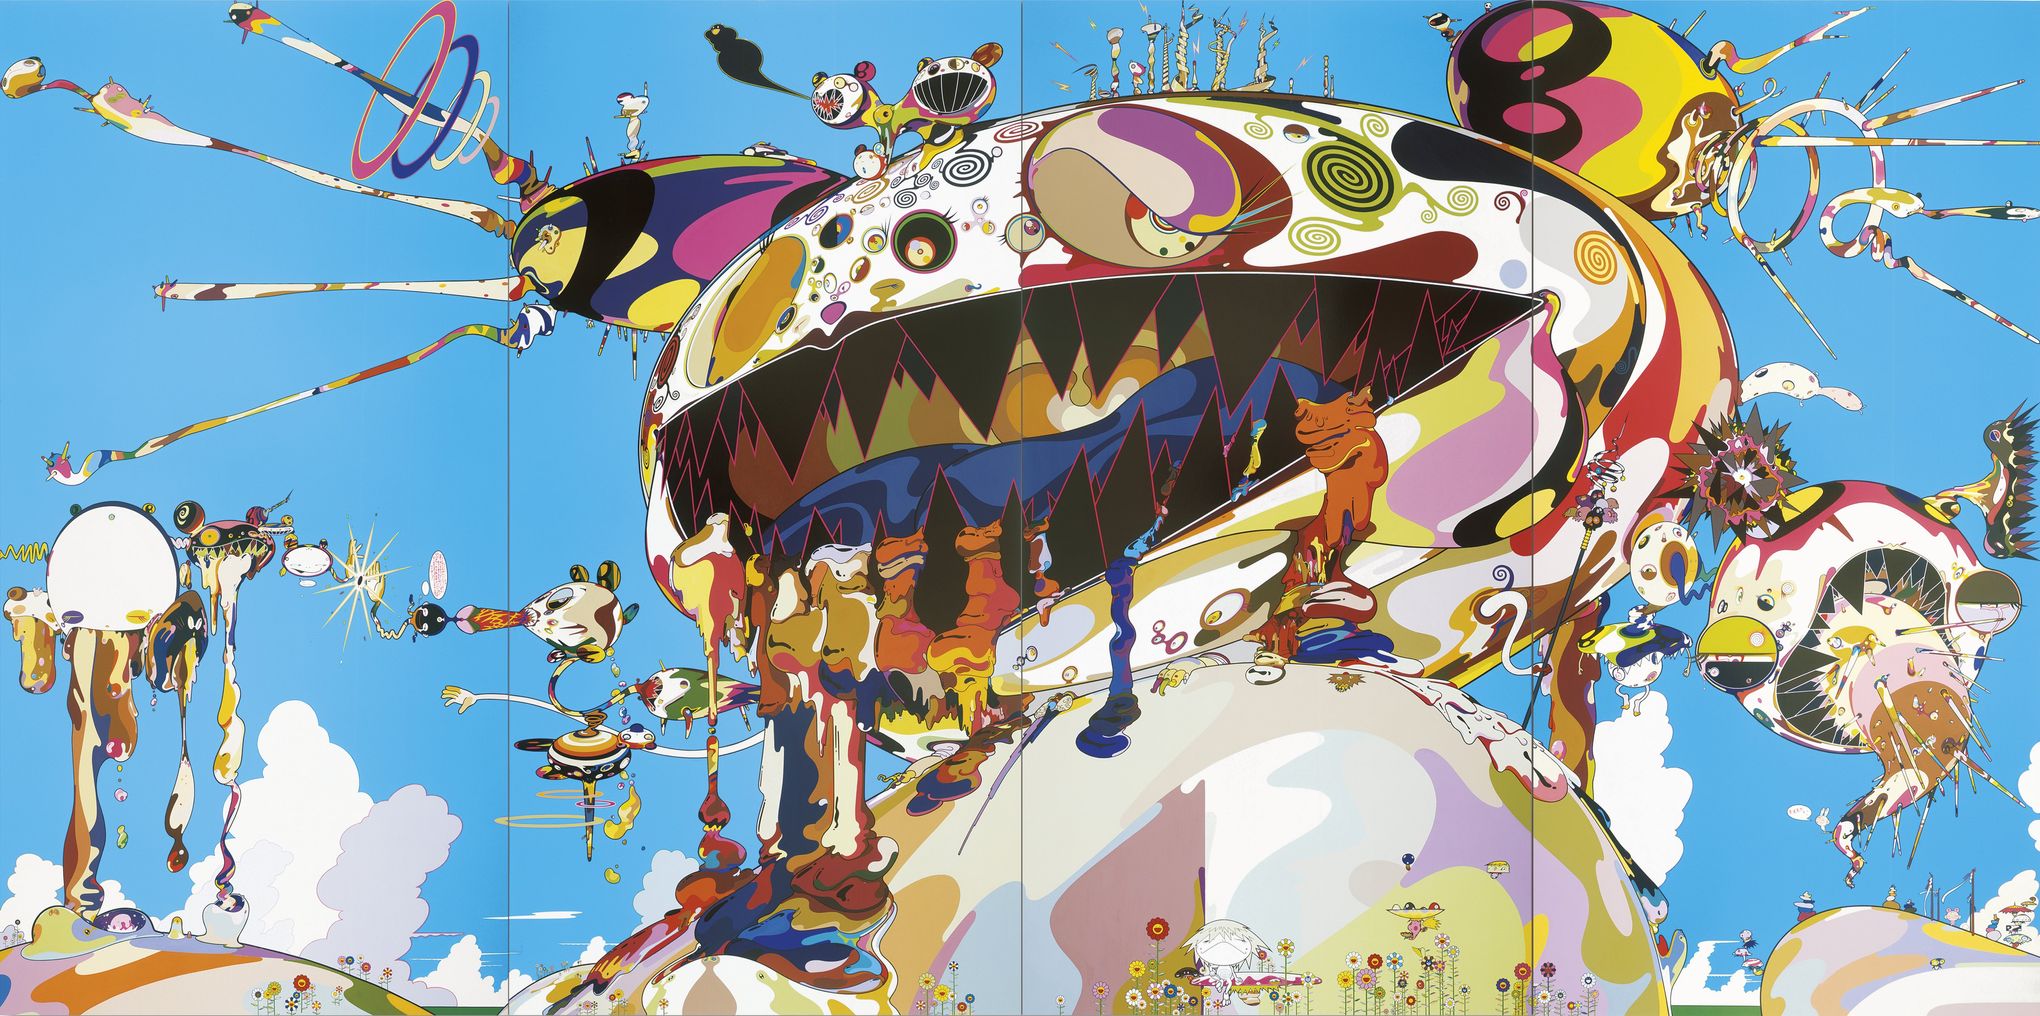 Top 10 Takashi Murakami collaborations that you need to know about